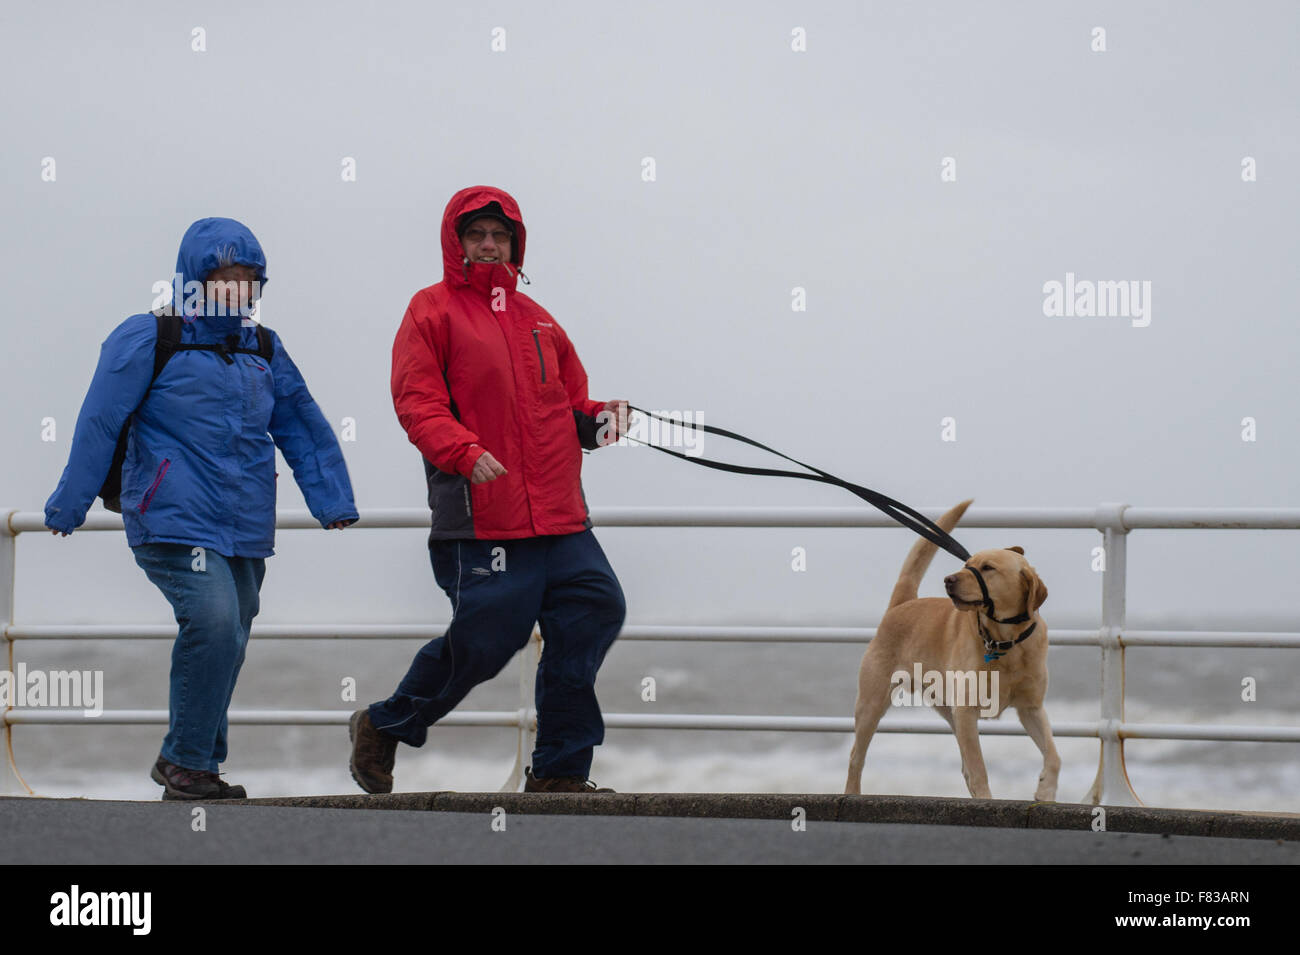 Aberystwyth Wales UK, Saturday 05 December 2015  A couple struggle to walk their dog on the promenade as the fourth named storm of the season, Storm Desmond, picks up strength and begins to batter the coast at Aberystwyth, west Wales  photo: © Keith Morris / Alamy Live  News Stock Photo